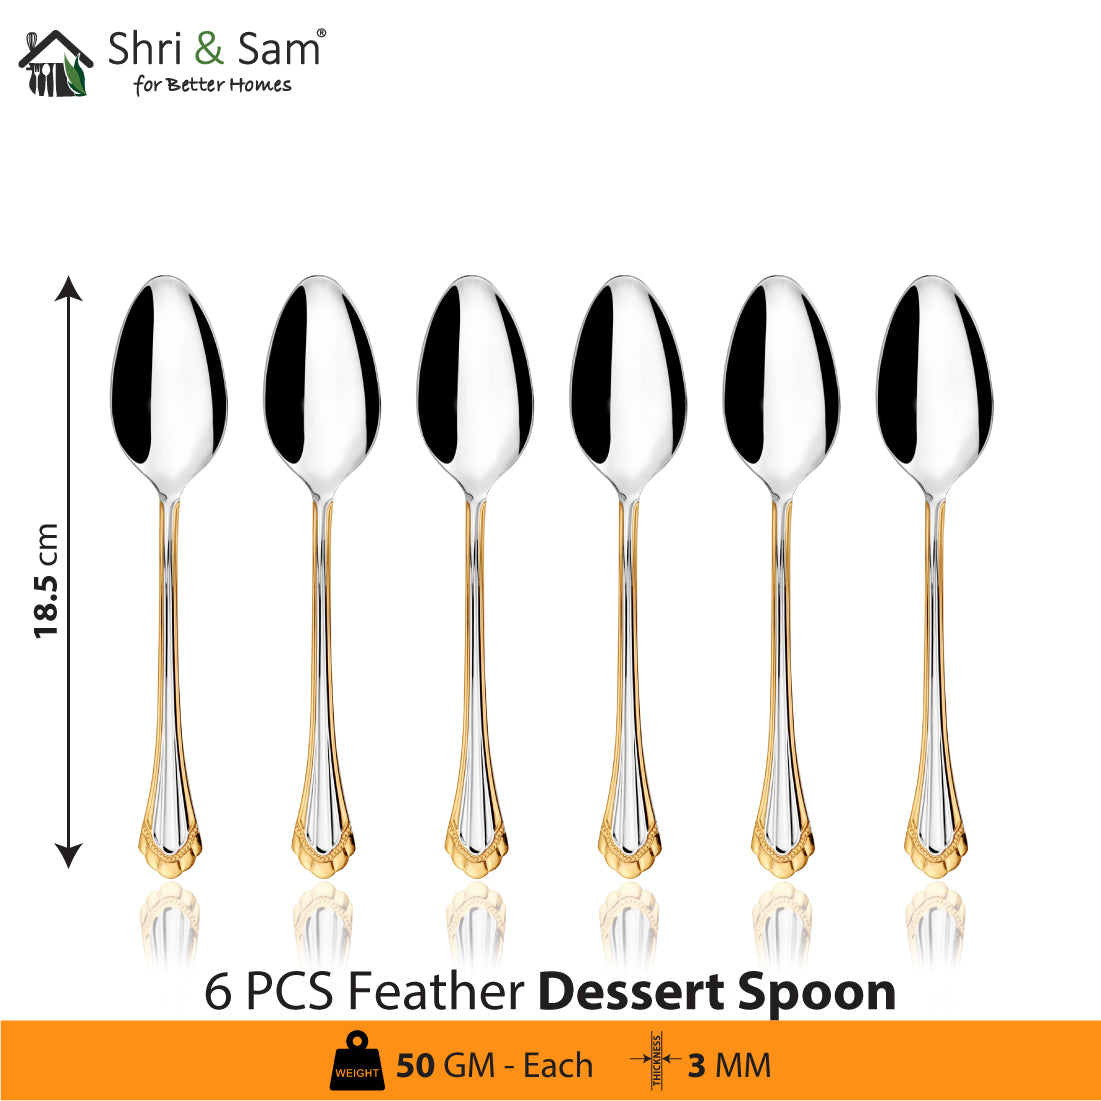 Stainless Steel 24 PCS Cutlery Set with Knife Feather